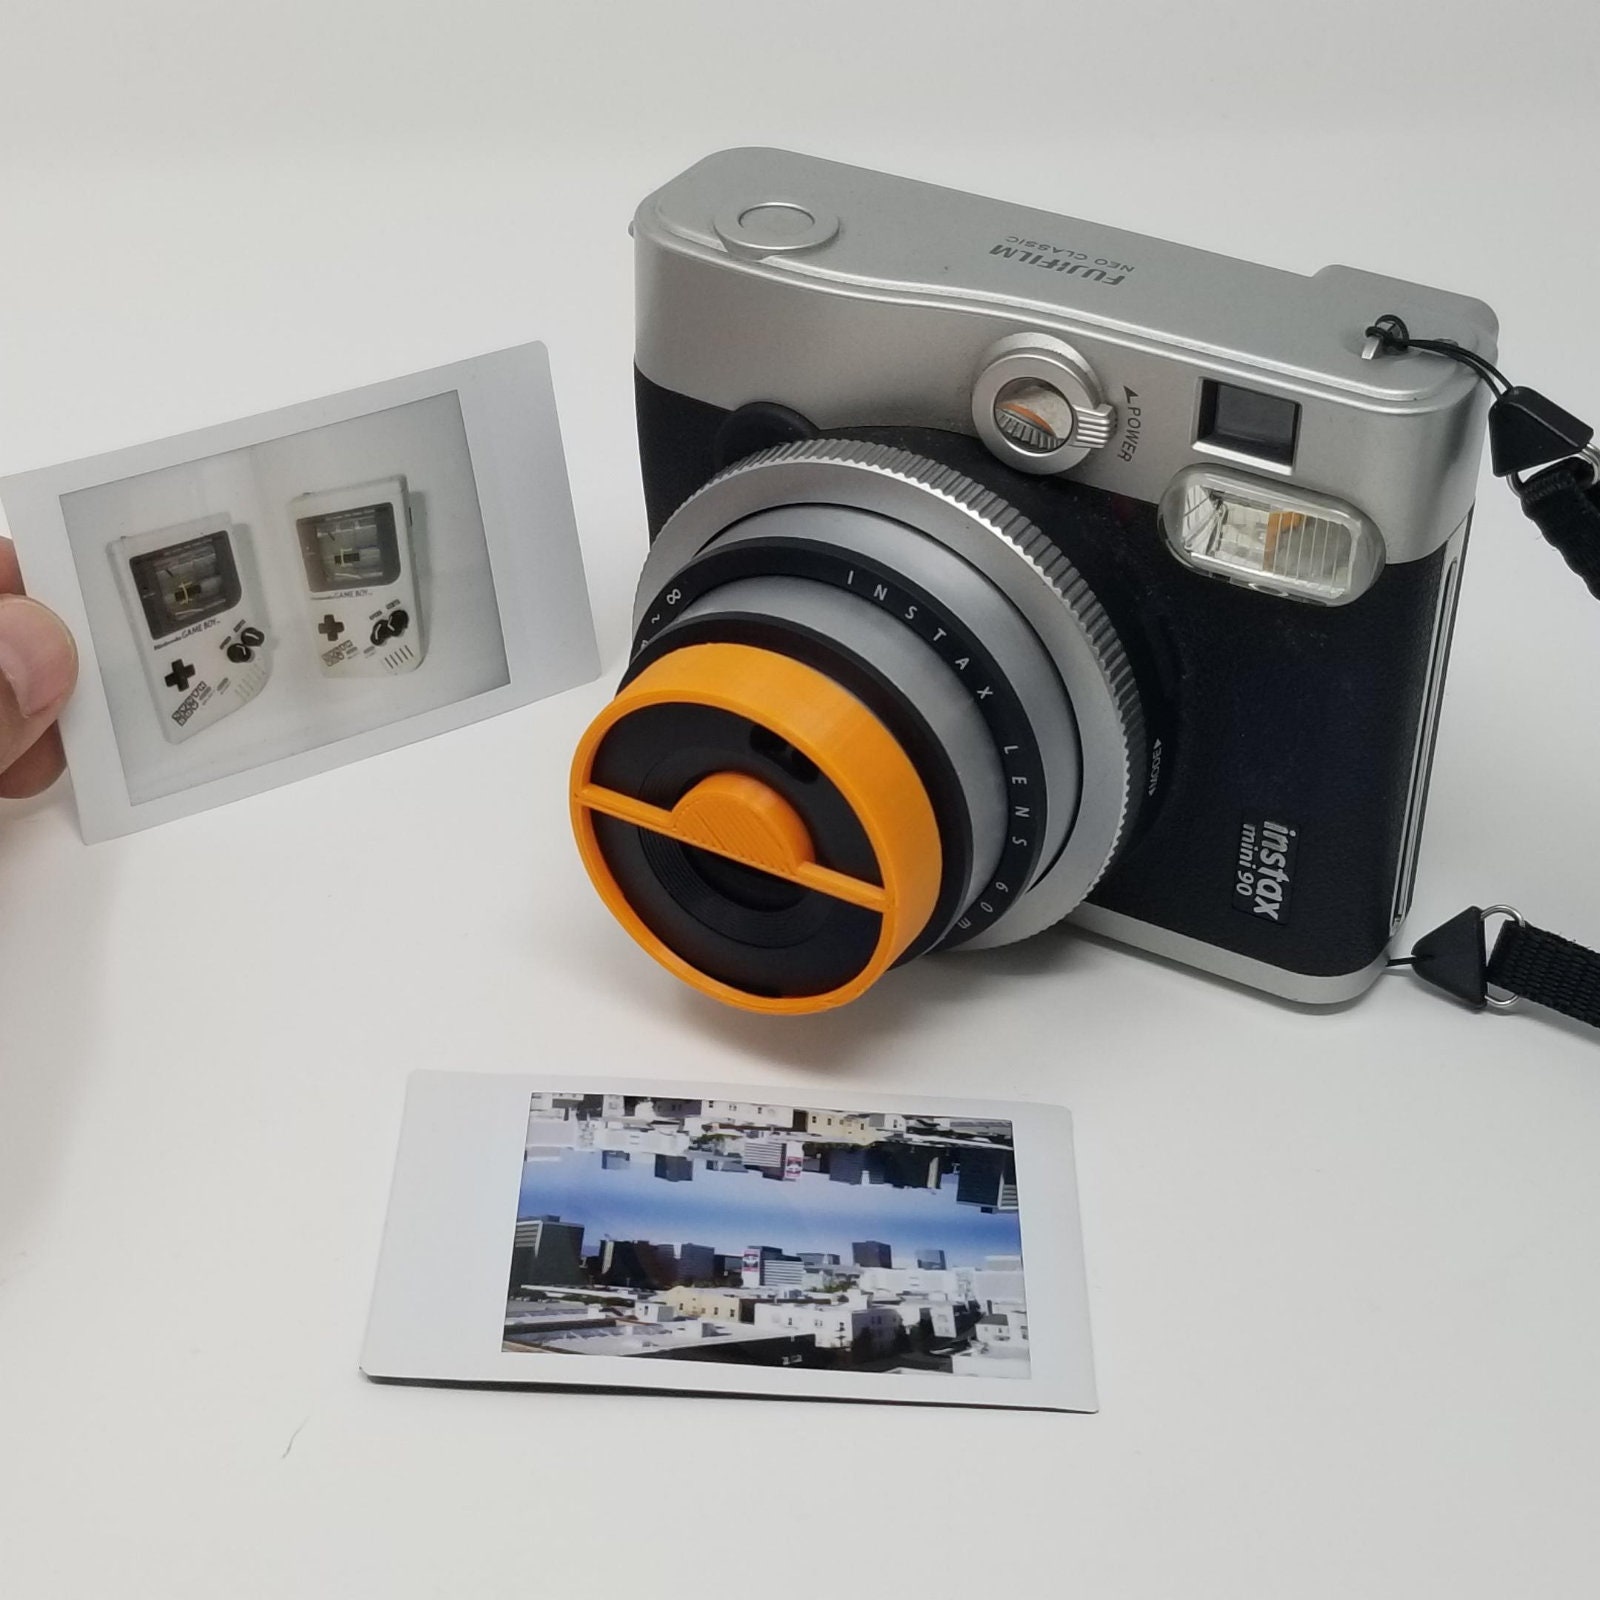 Review: The Fuji Instax Mini 90 Neo Classic Camera - The New York Times